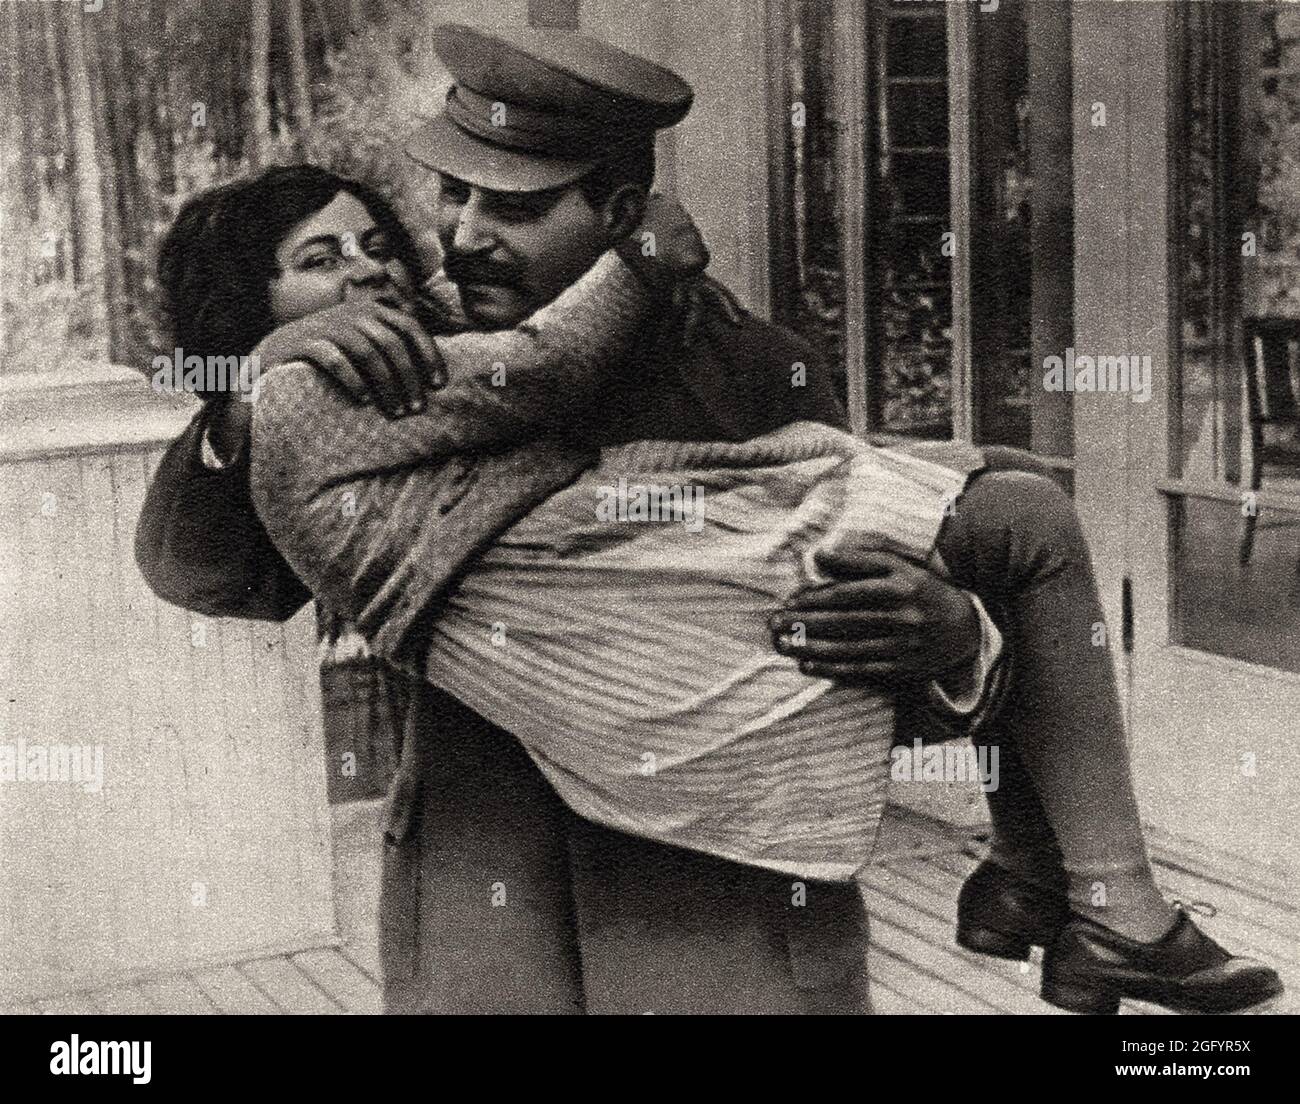 Stalin holding his daughter Svetlana. The photo is from 1937 - Svetlana is 11 and Stalin is 59. Stock Photo